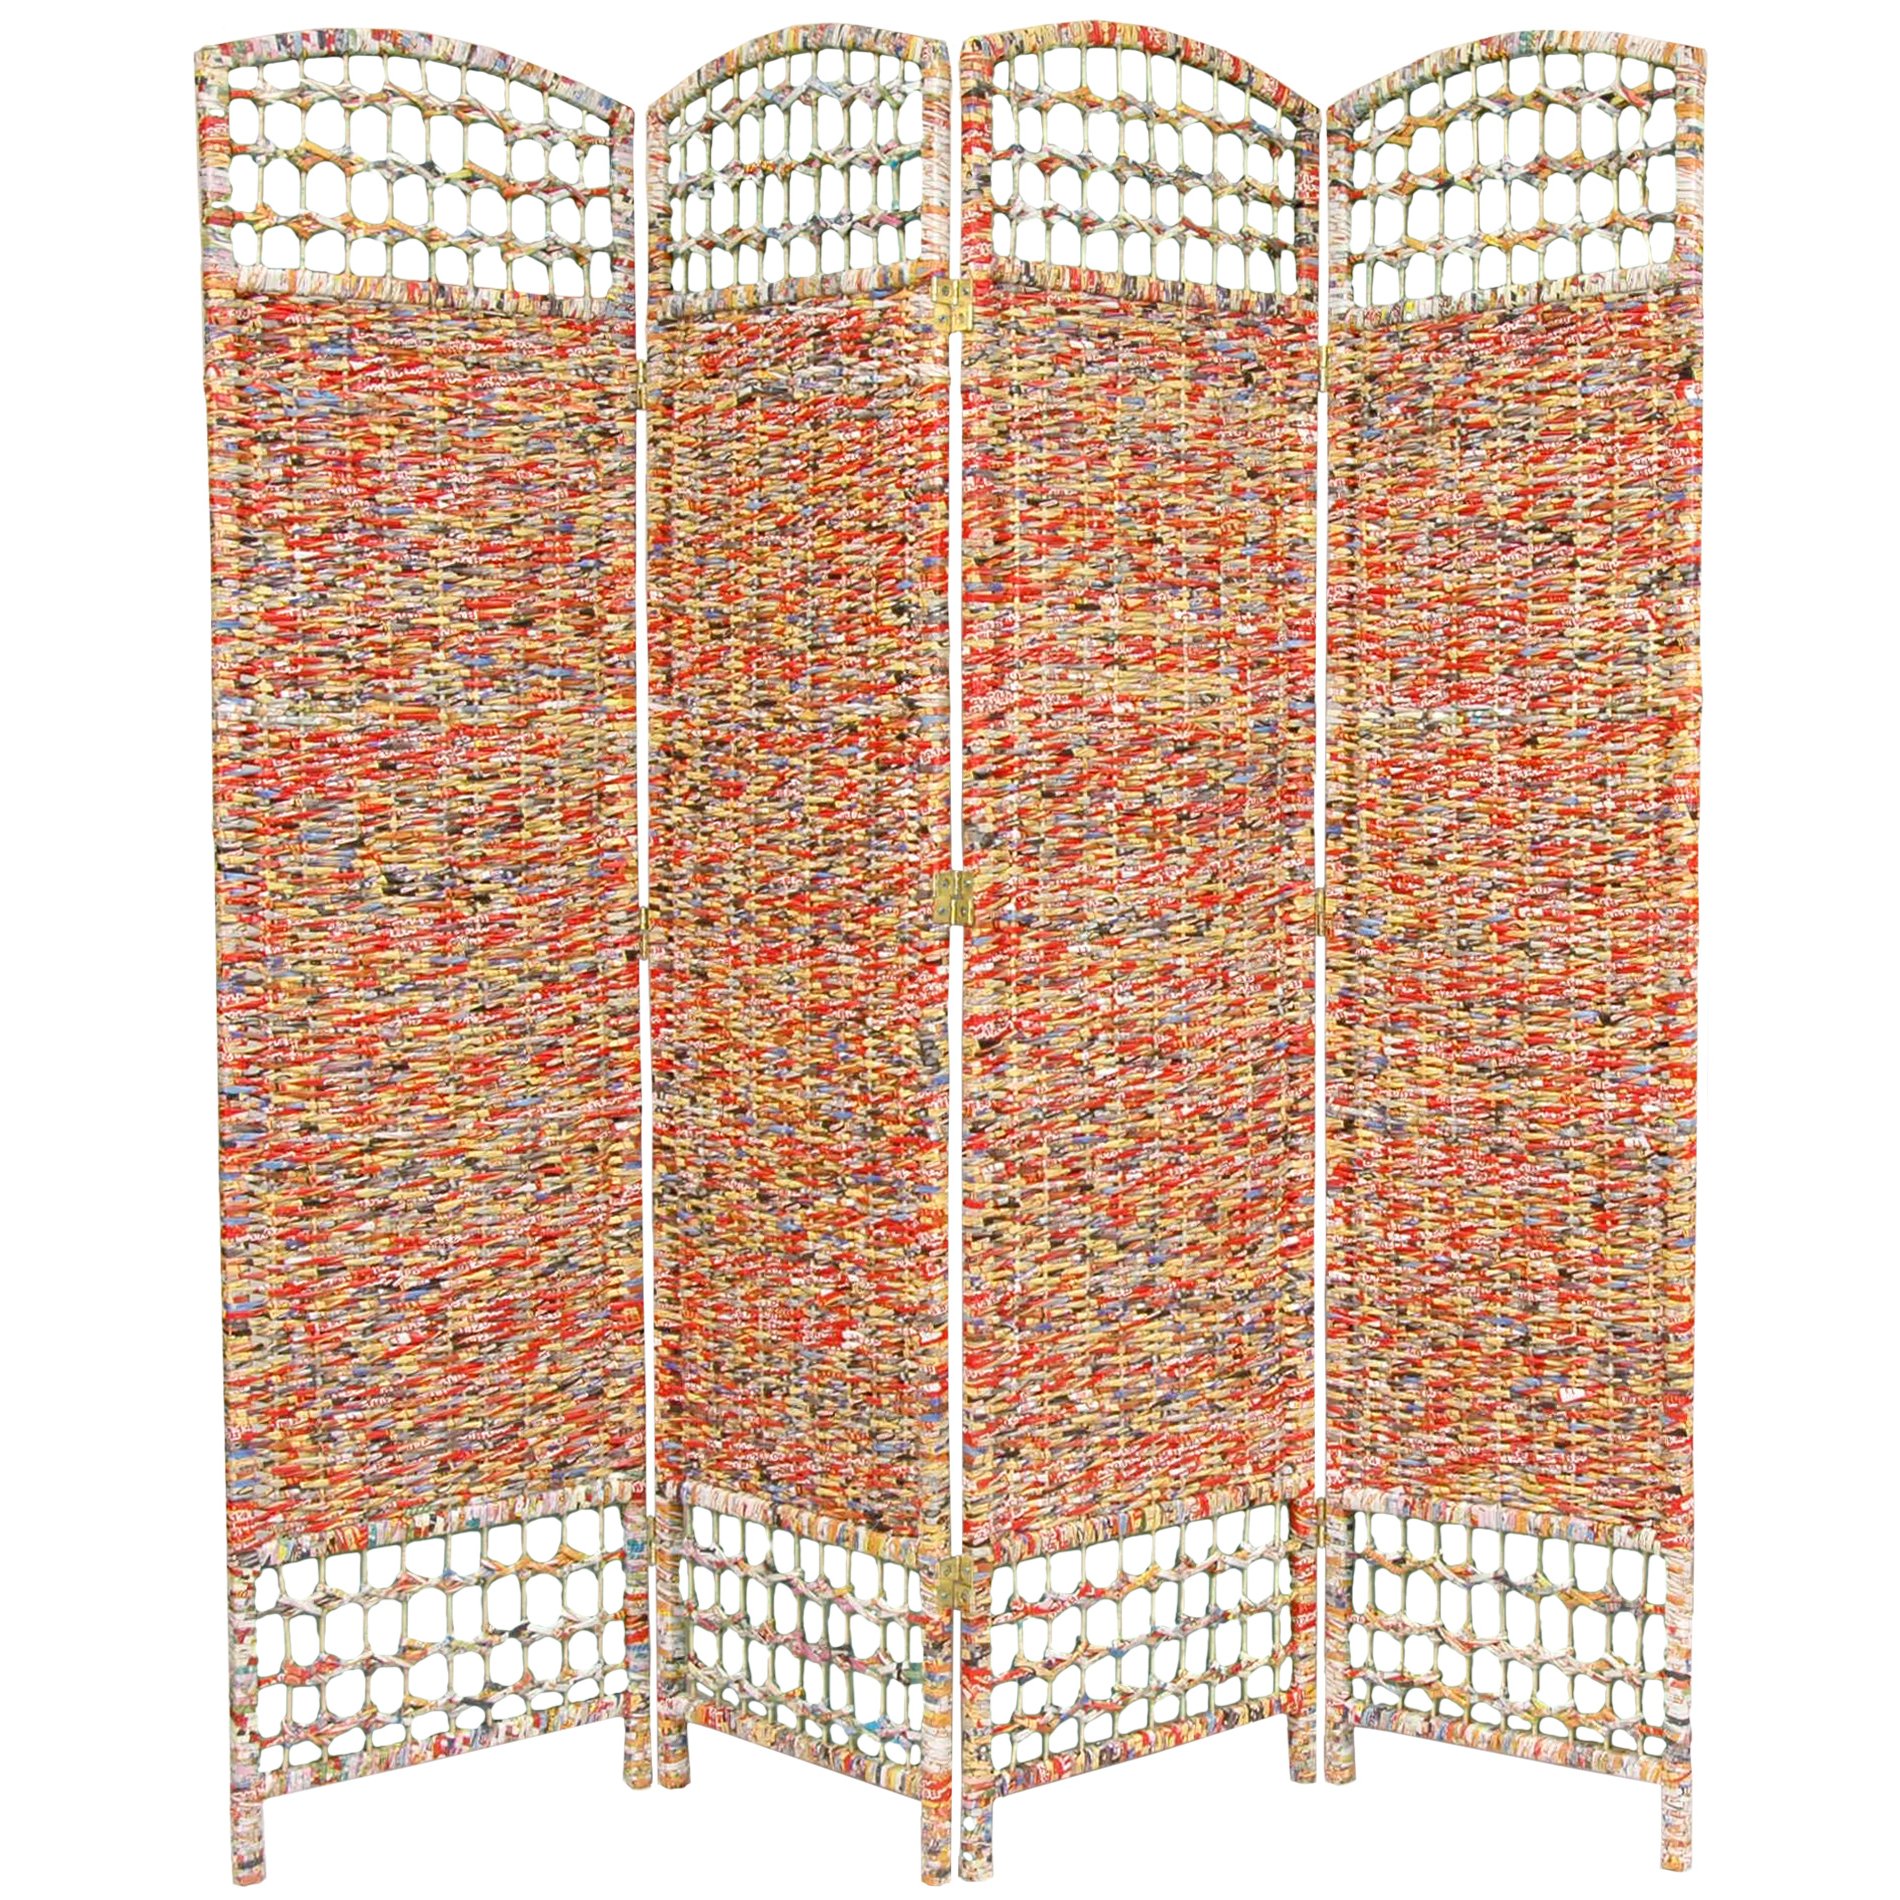 Oriental Furniture 5 1/2 ft. Tall Recycled Magazine Room Divider - 4 Panel